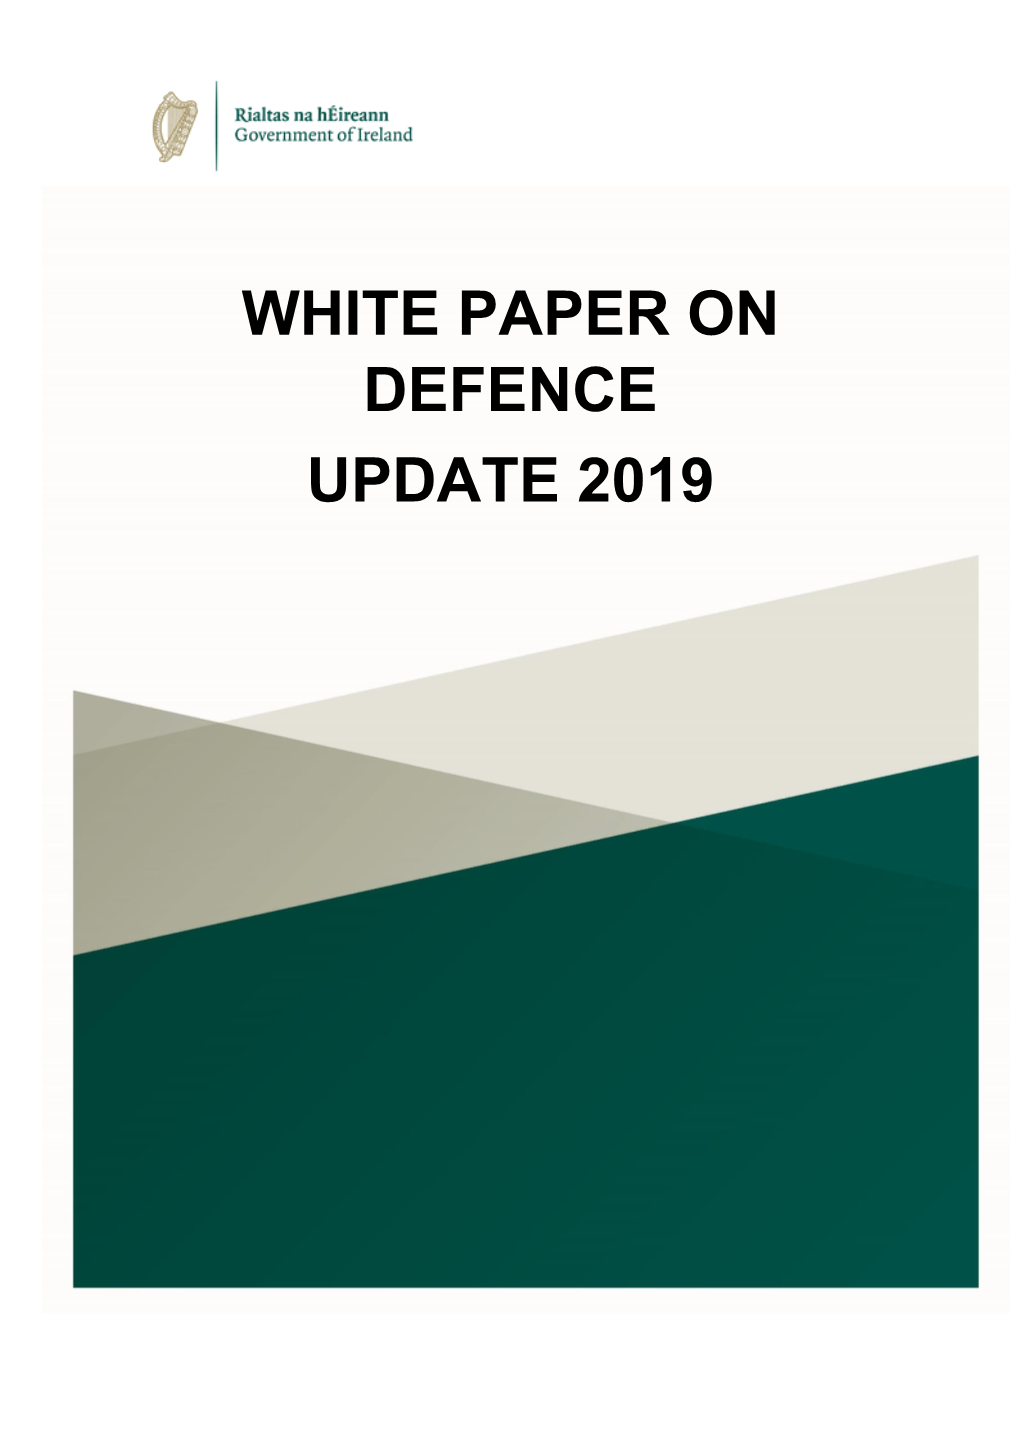 White Paper on Defence Update 2019